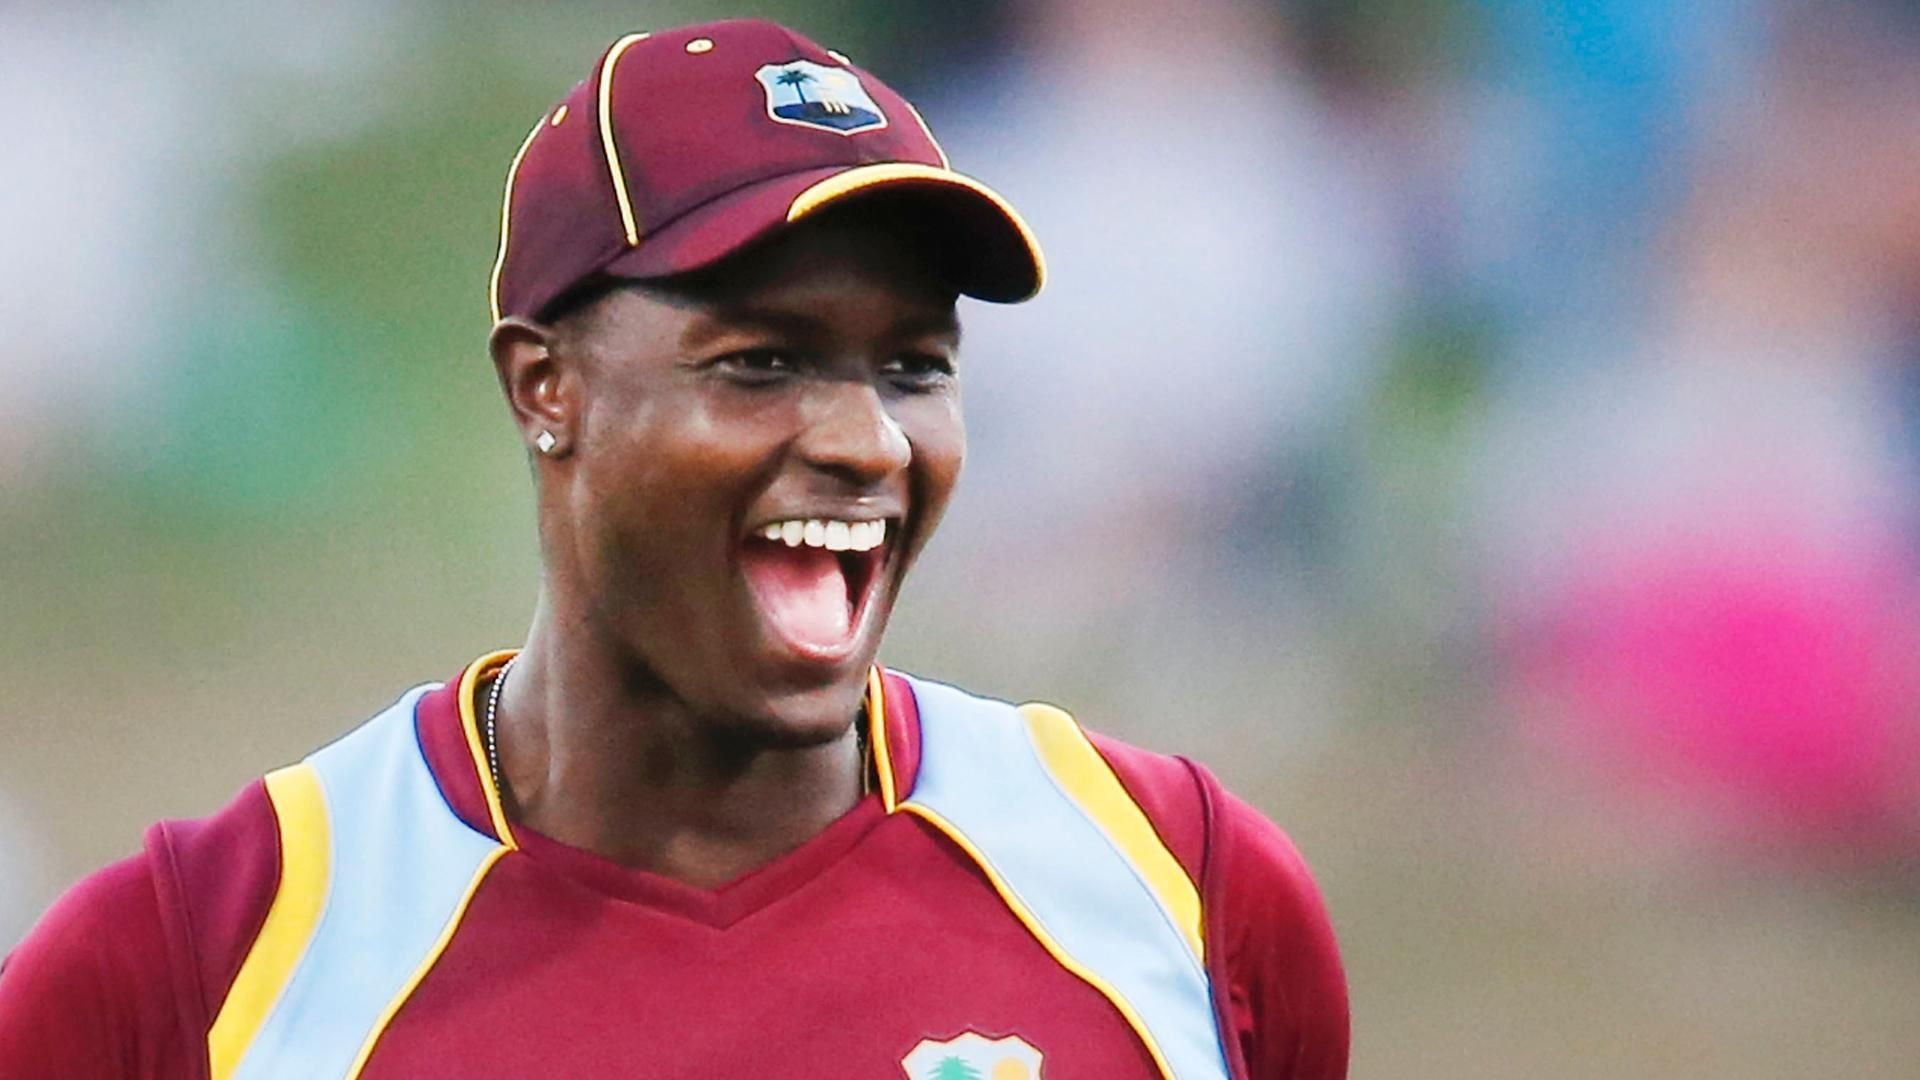 Jason Holder Image and Collection